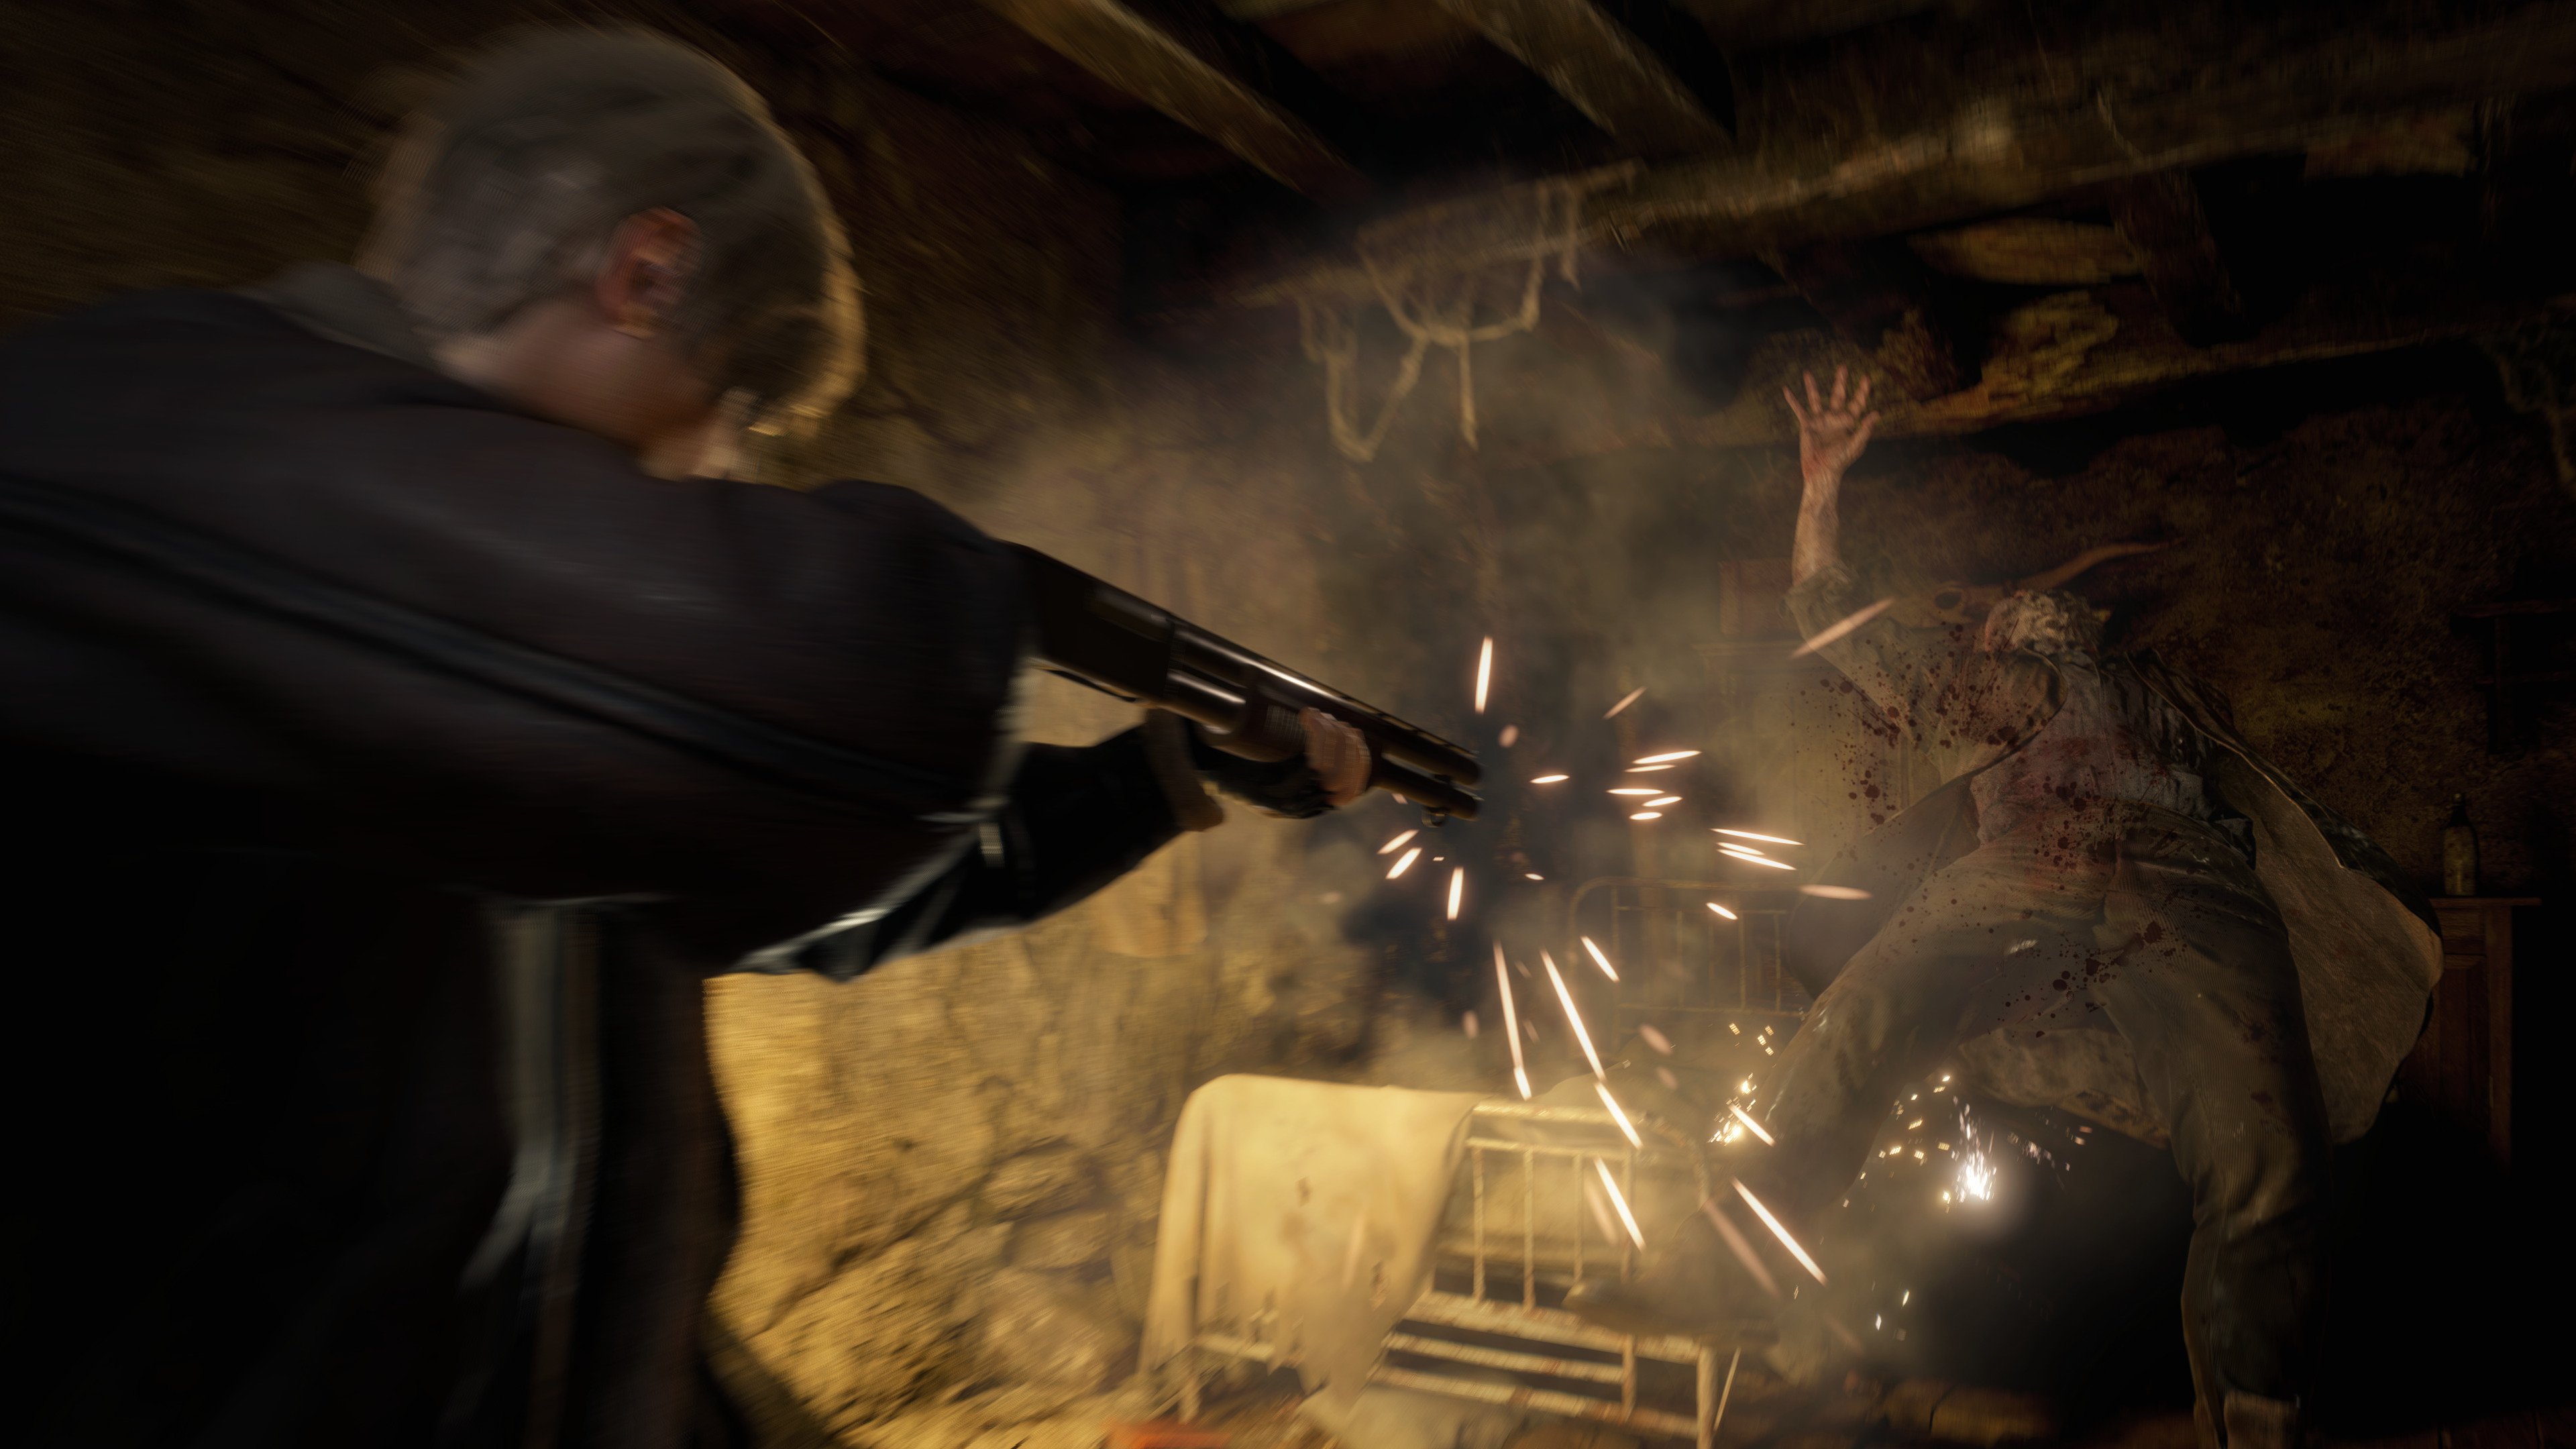 Anyone else playing the Resident Evil 4 Remake this past week? RE4R has  been 10x more enjoyable than TLOU2 in my opinion. Also seems to be going a  lot better for PC